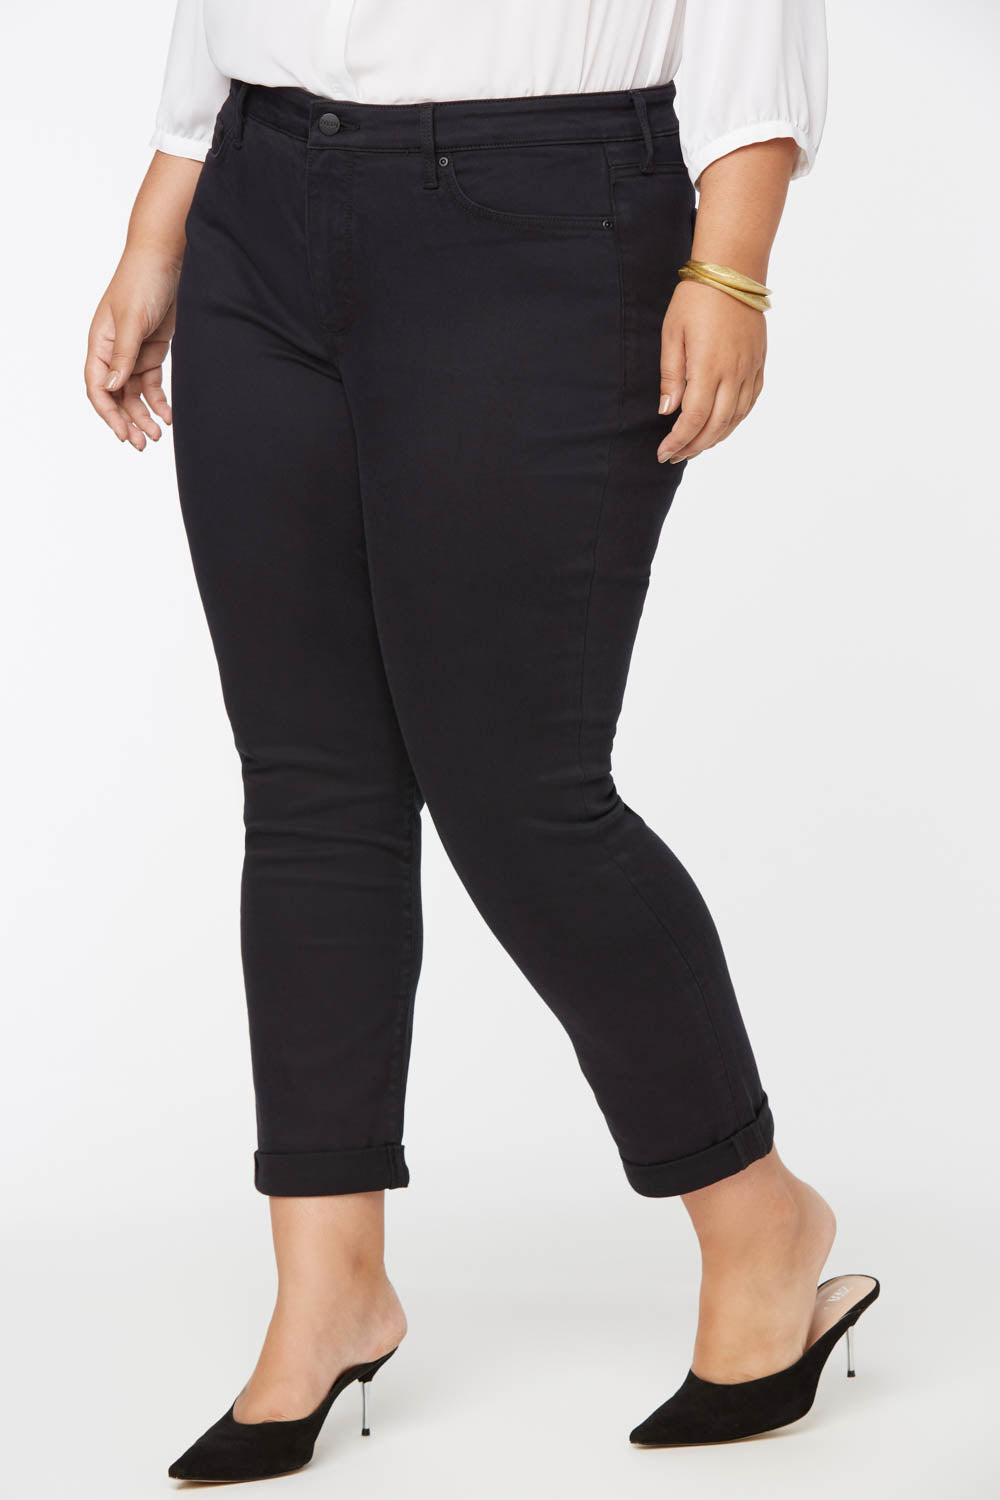 NYDJ Sheri Slim Ankle Jeans In Plus Size With Roll Cuffs - Black